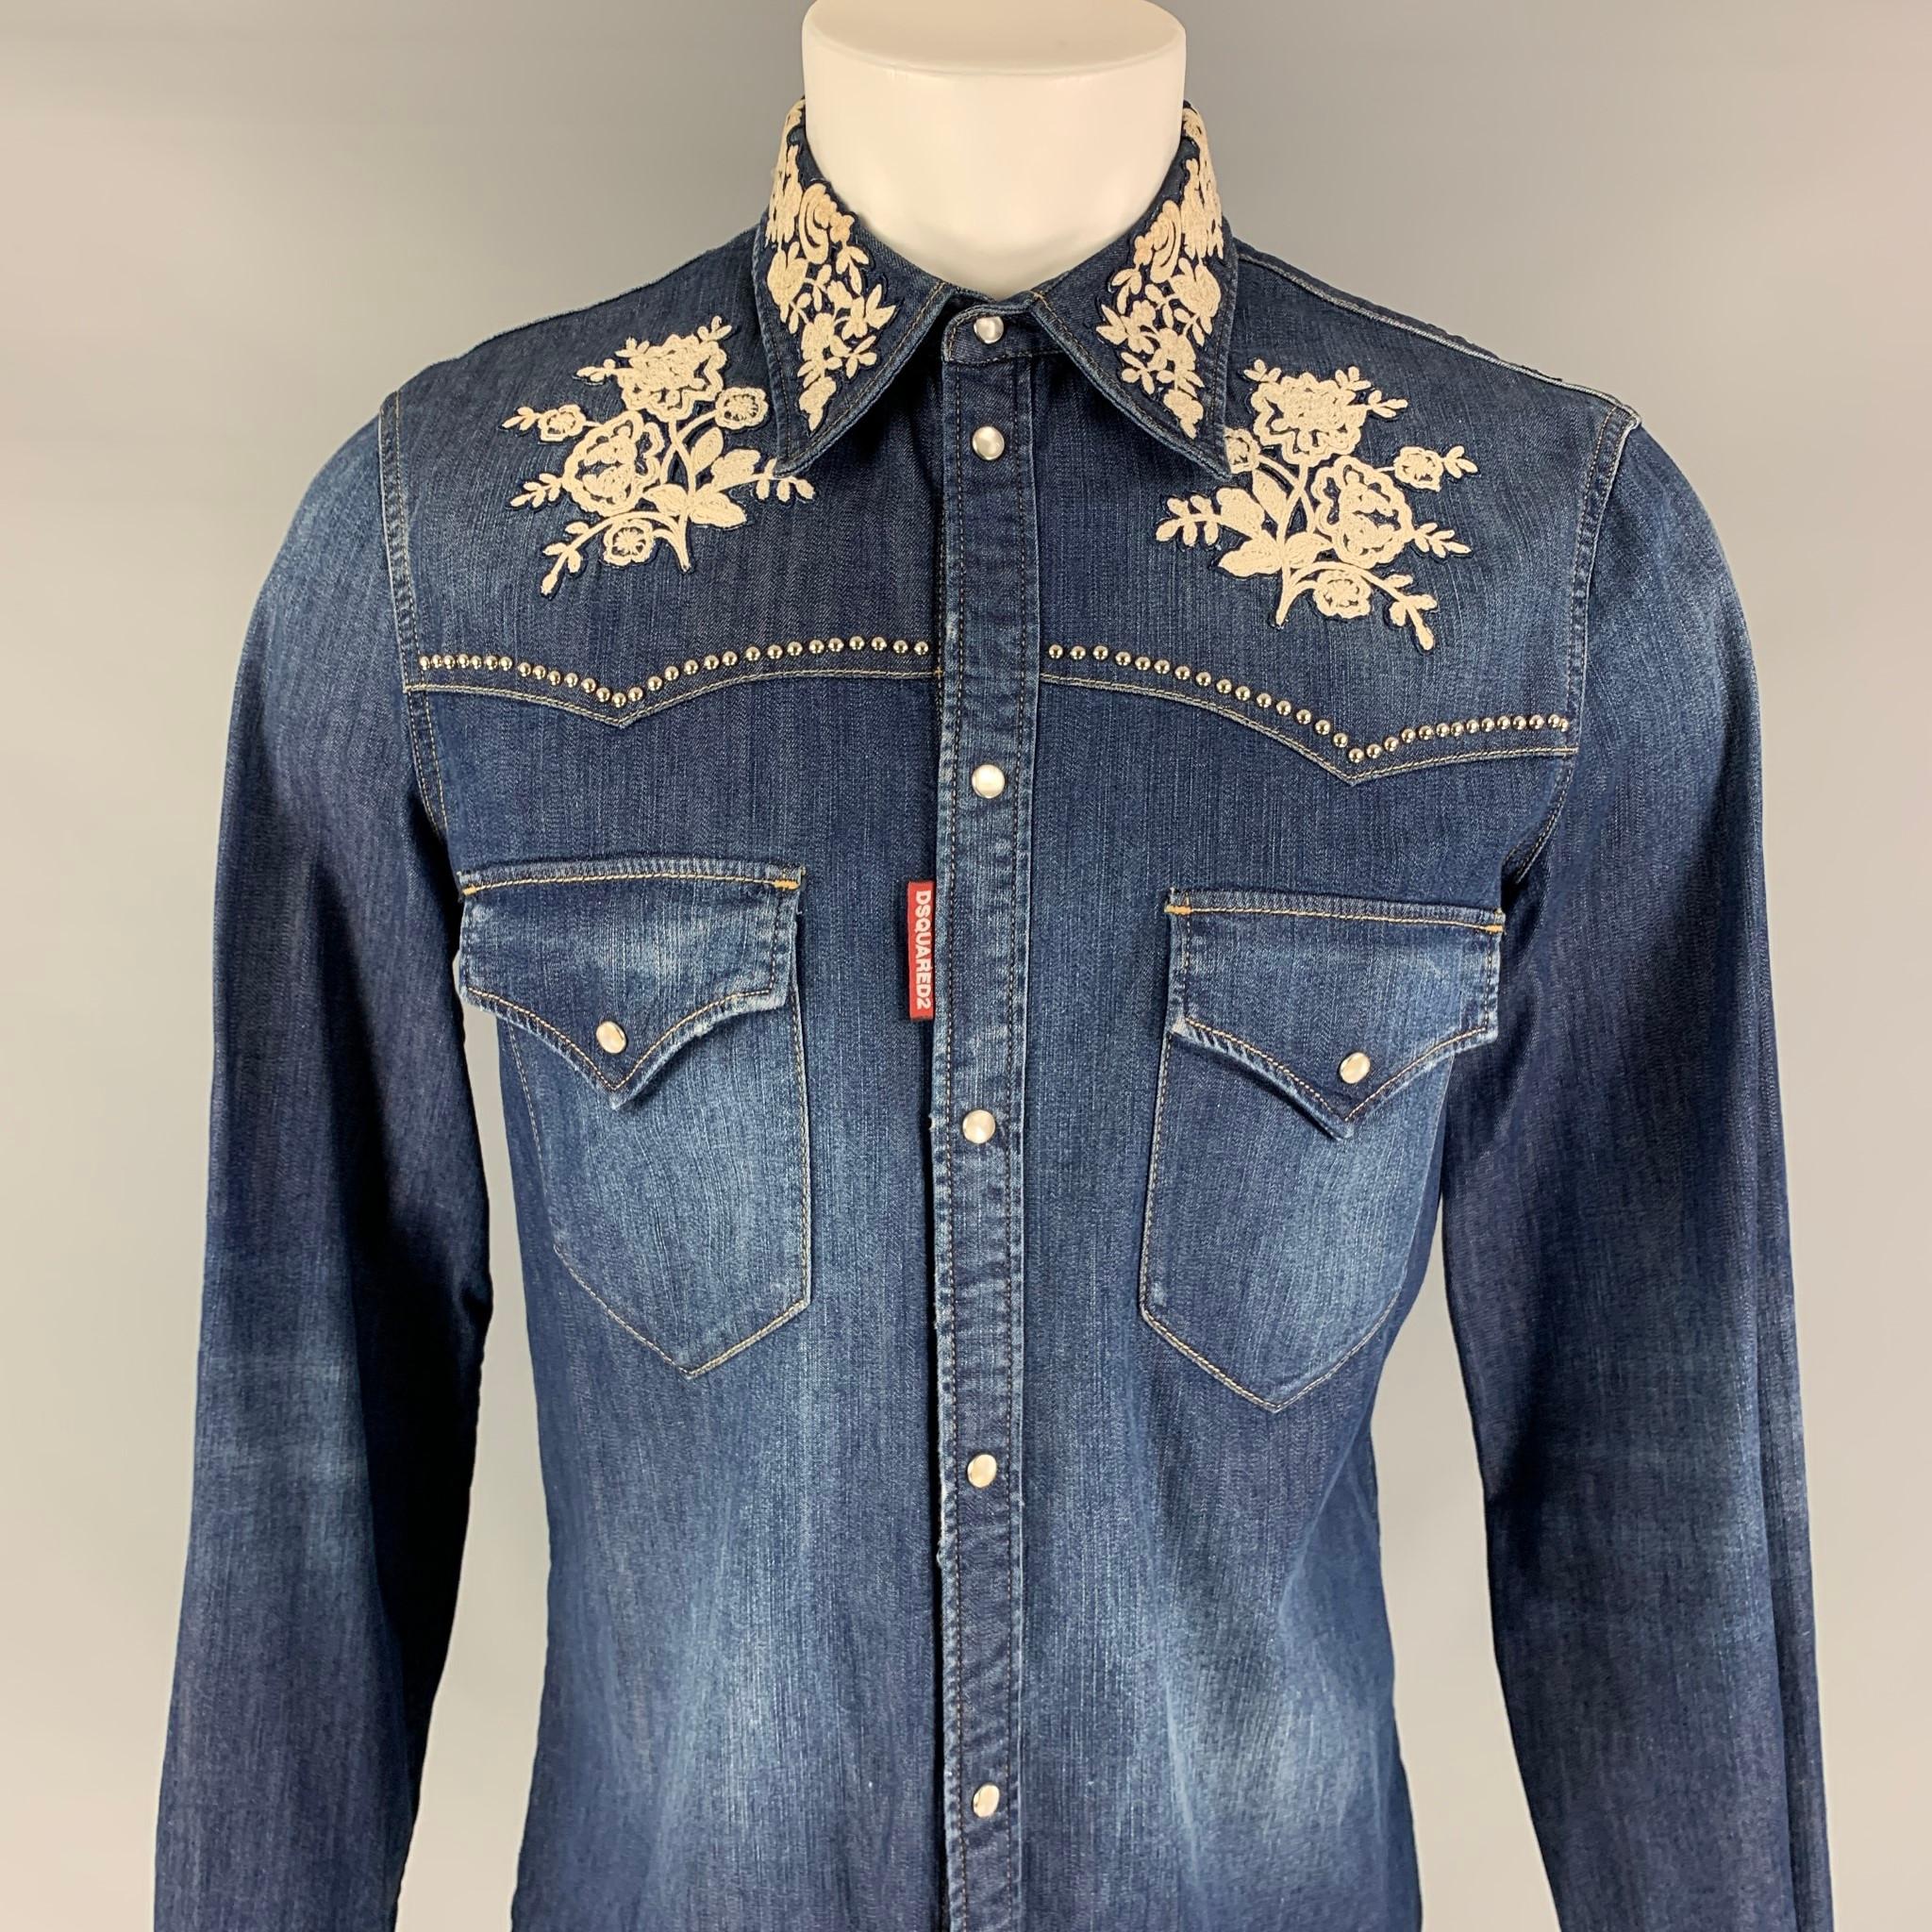 DSQUARED2 long sleeve shirt comes in a indigo denim featuring white floral embroidery details, pointed collar, flap pockets, contrast stitching, and a snap button closure. Made in Italy. 

Excellent Pre-Owned Condition.
Marked: